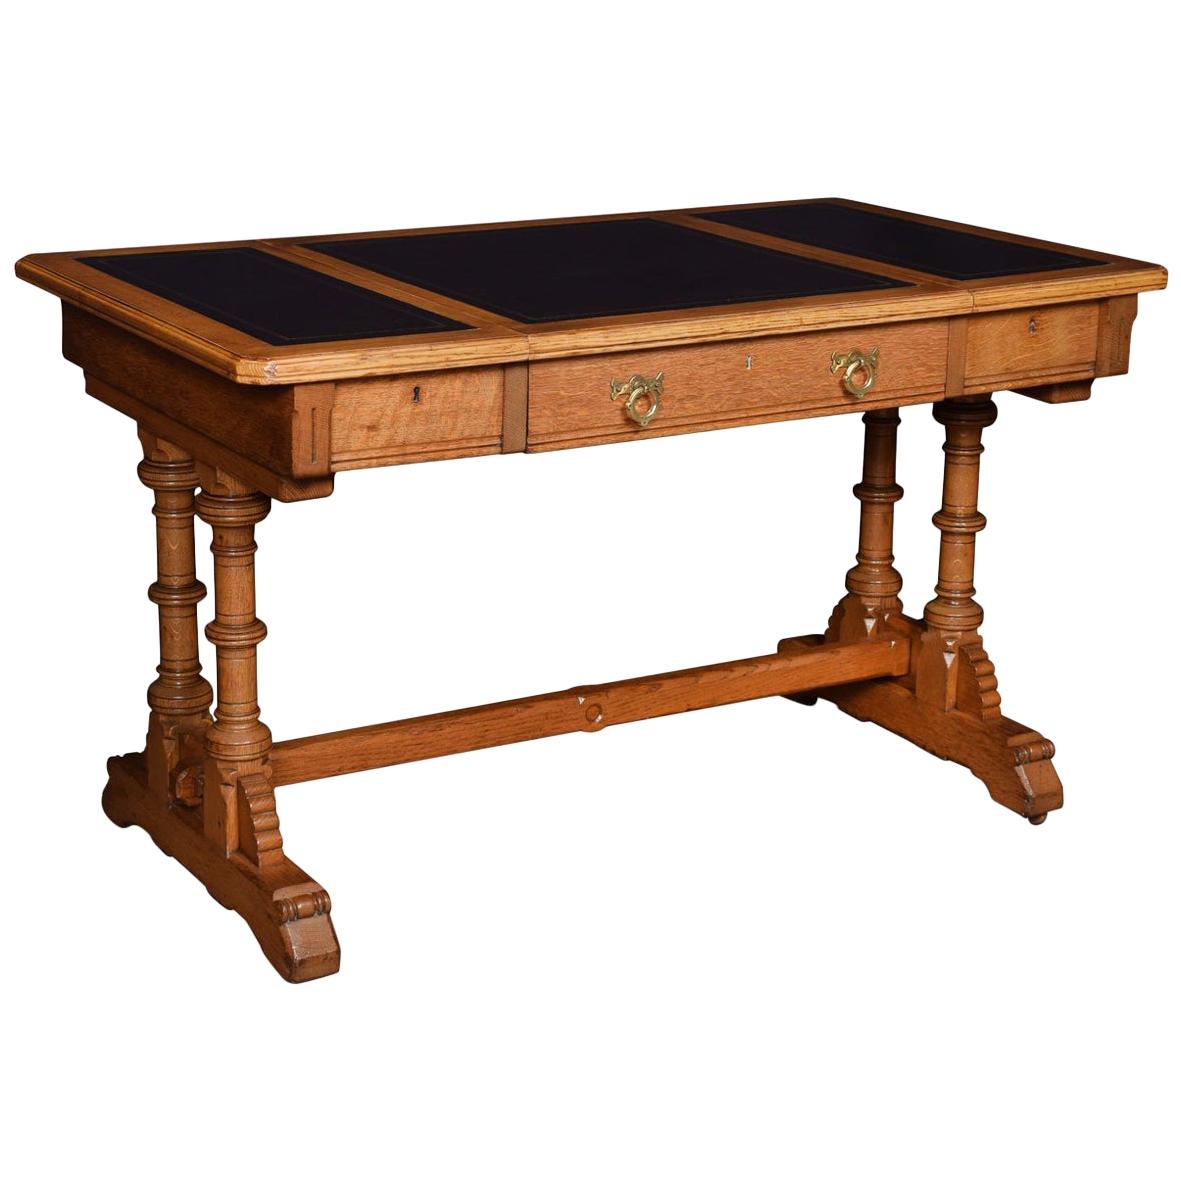 Victorian Oak Writing Table by Lamb of Manchester